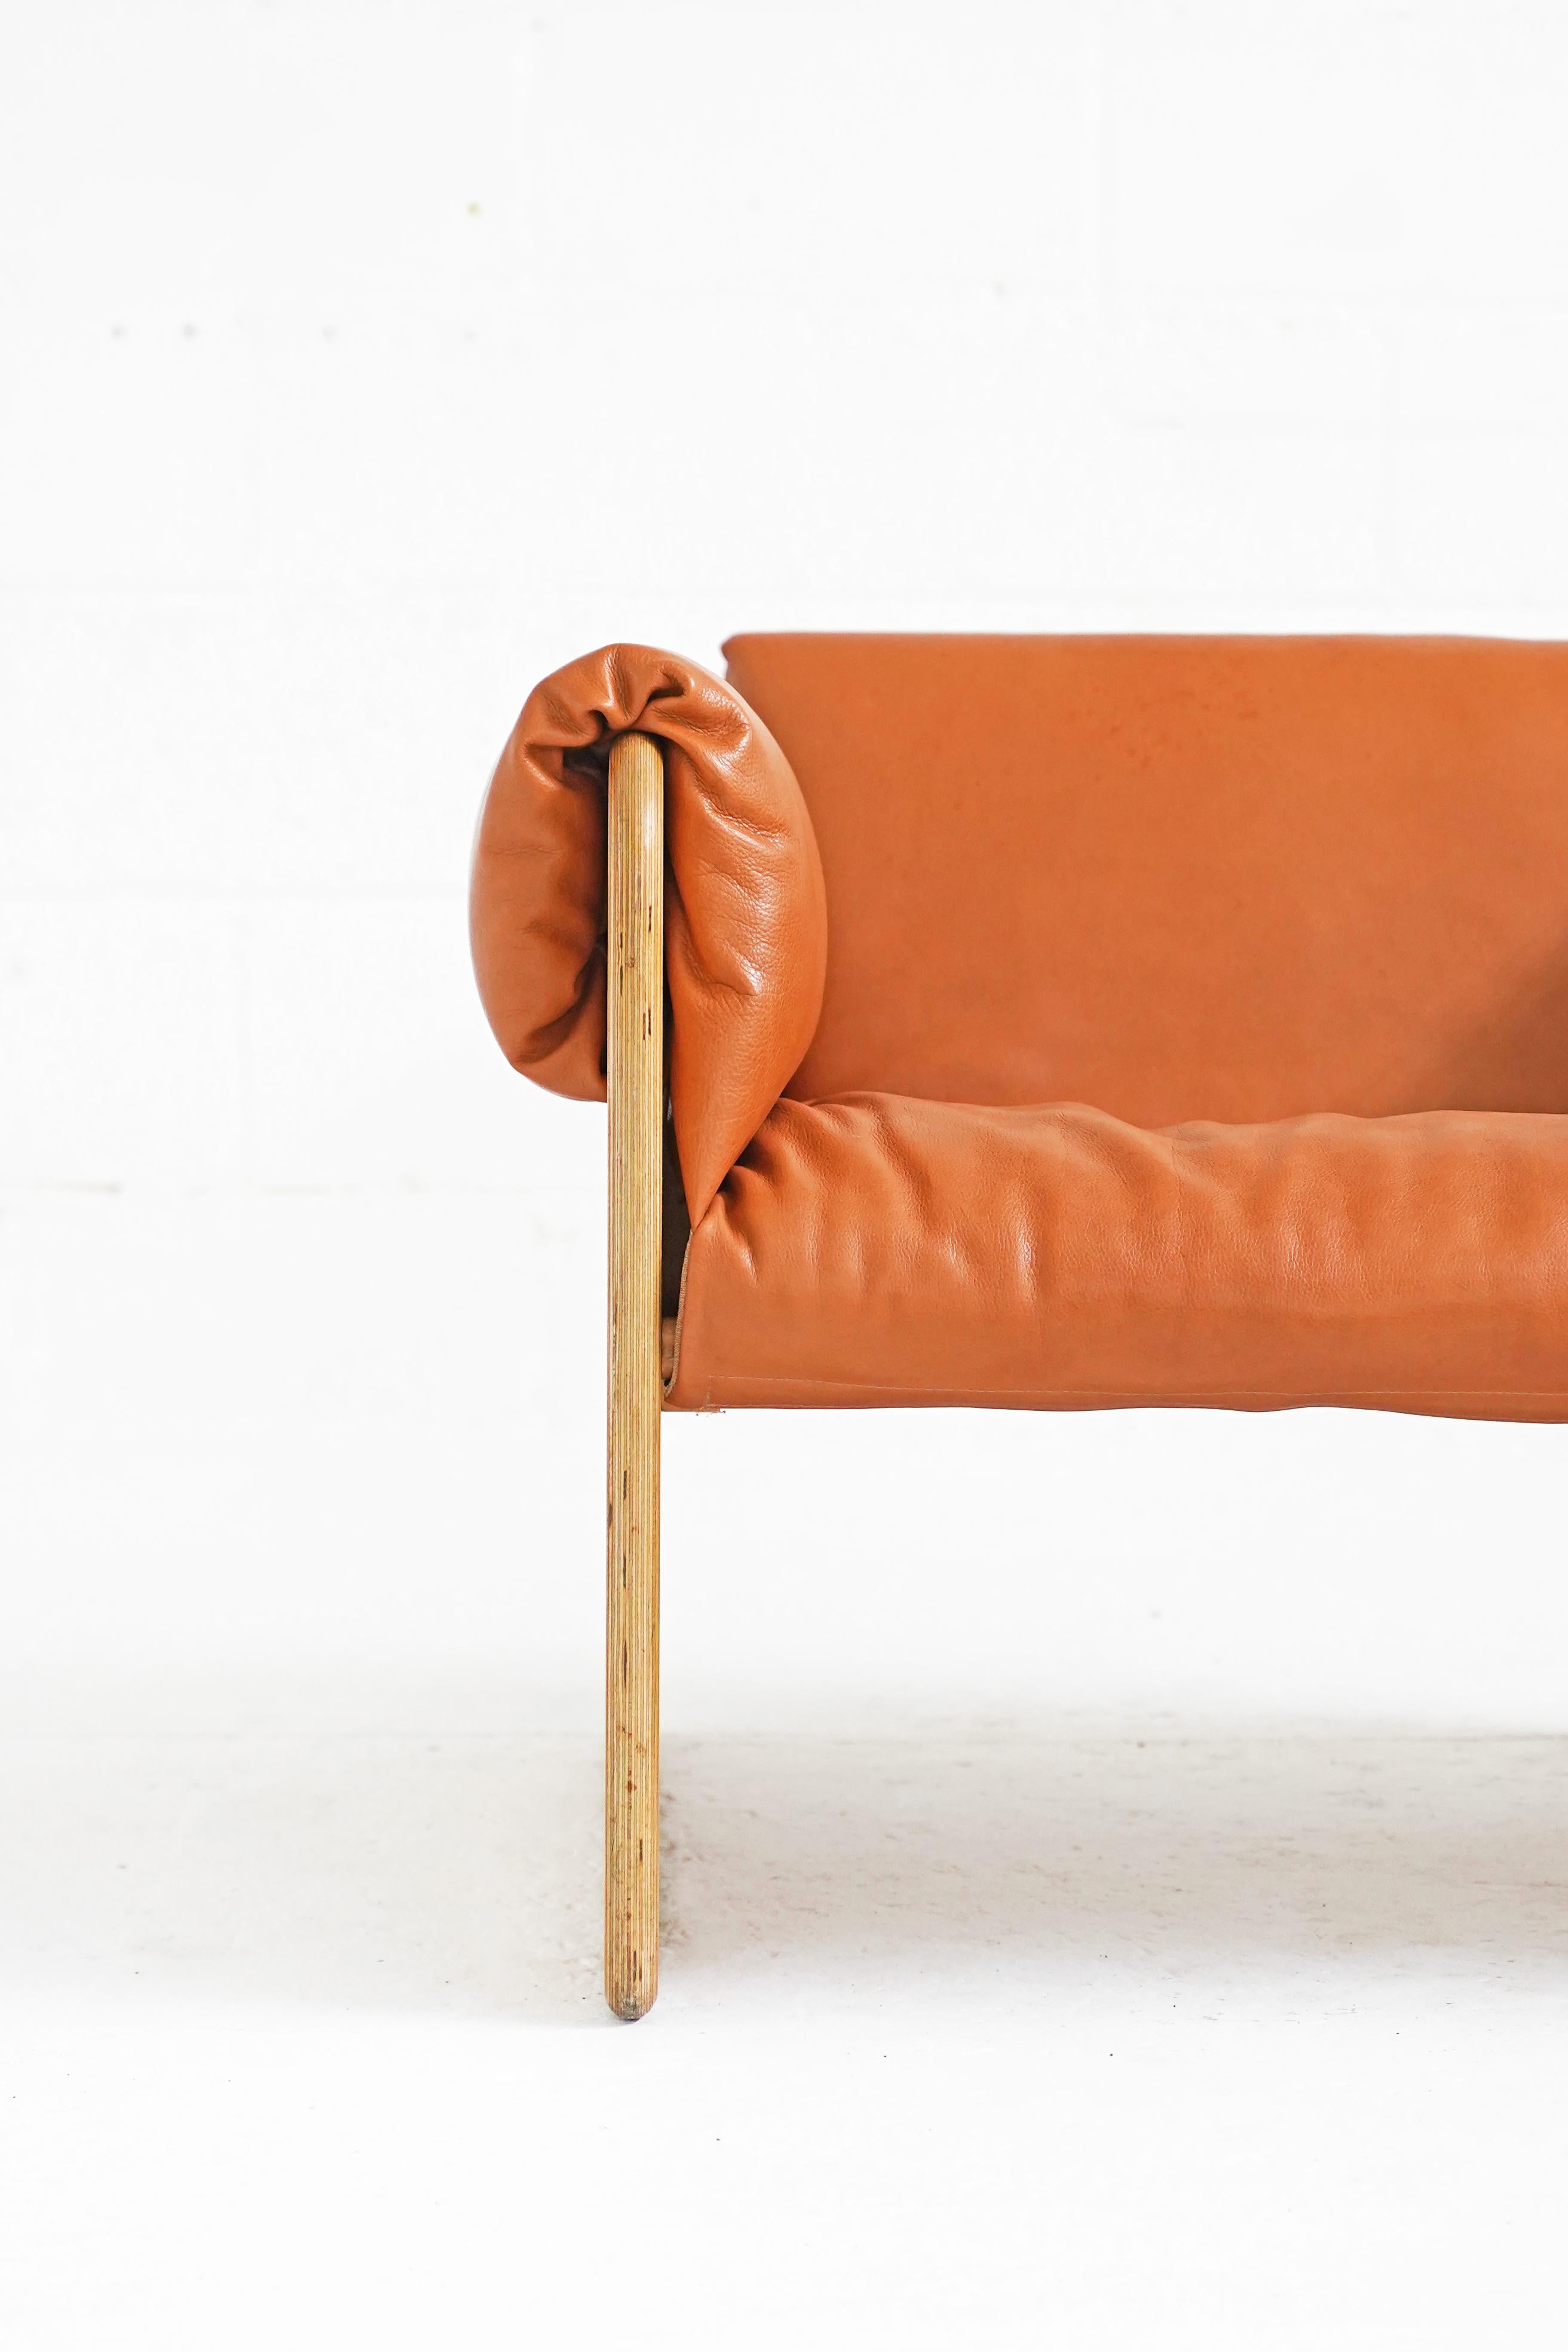 Canadian Renaissance Easy Chair in Maple and Leather by Keith Muller and Michael Stewart